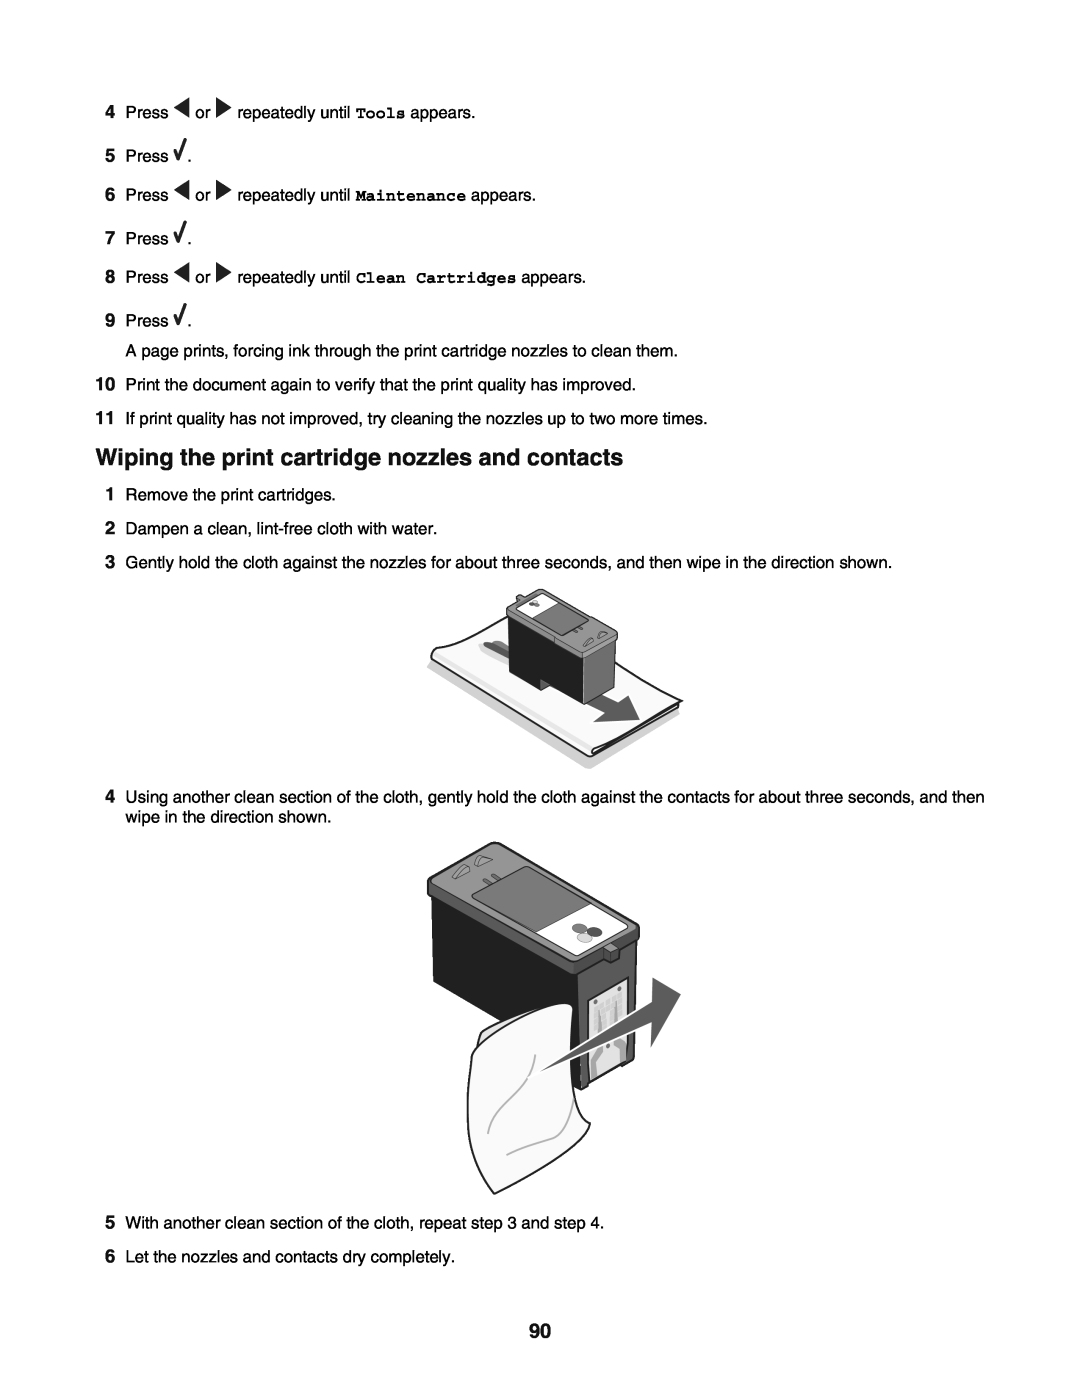 Lexmark 5400 manual Wiping the print cartridge nozzles and contacts 